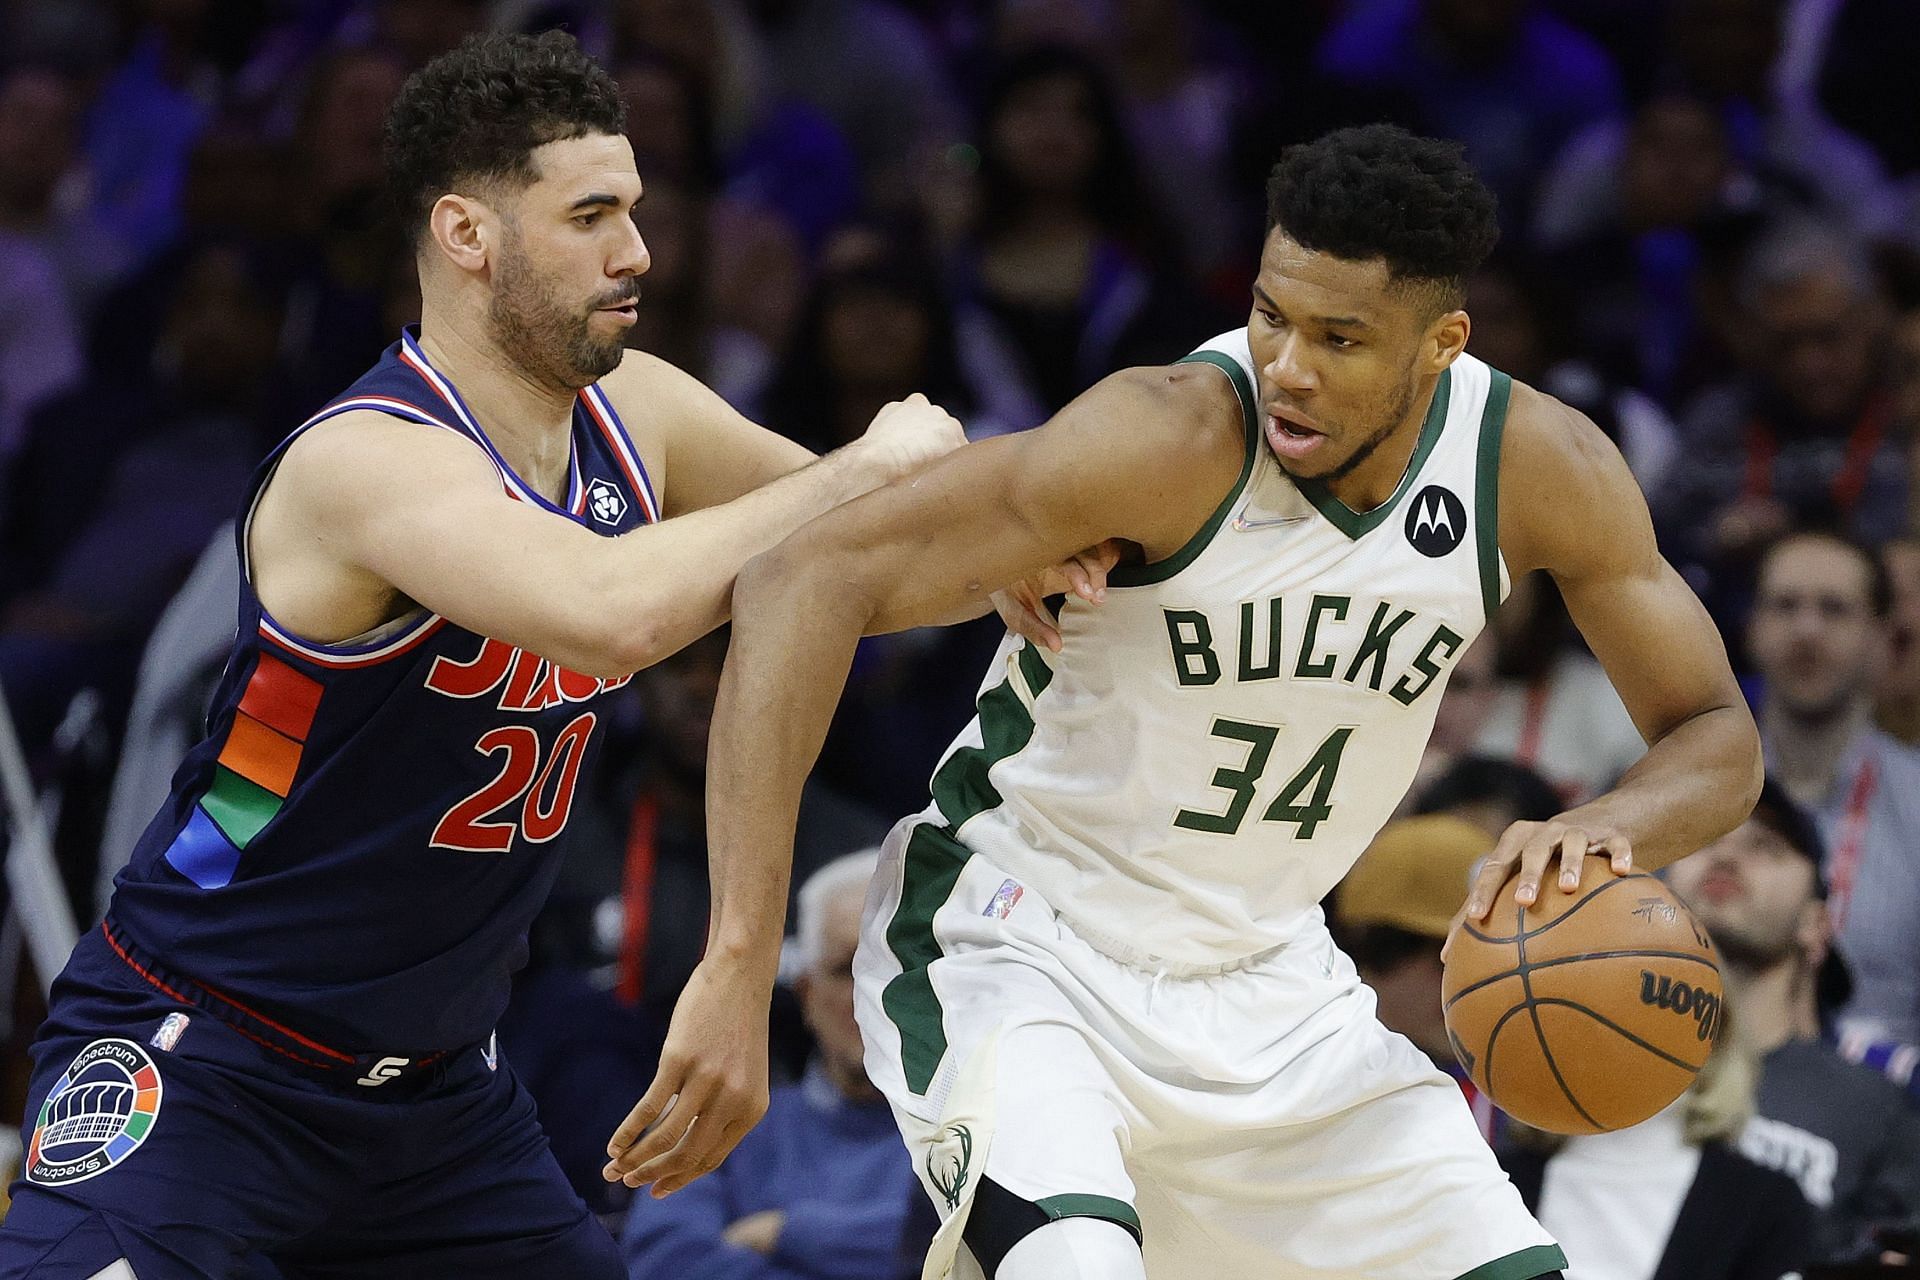 Giannis Antetokounmpo came away with a dominant performance to lead the Milwaukee Bucks to a narrow victory versus the Philadelphia 76ers